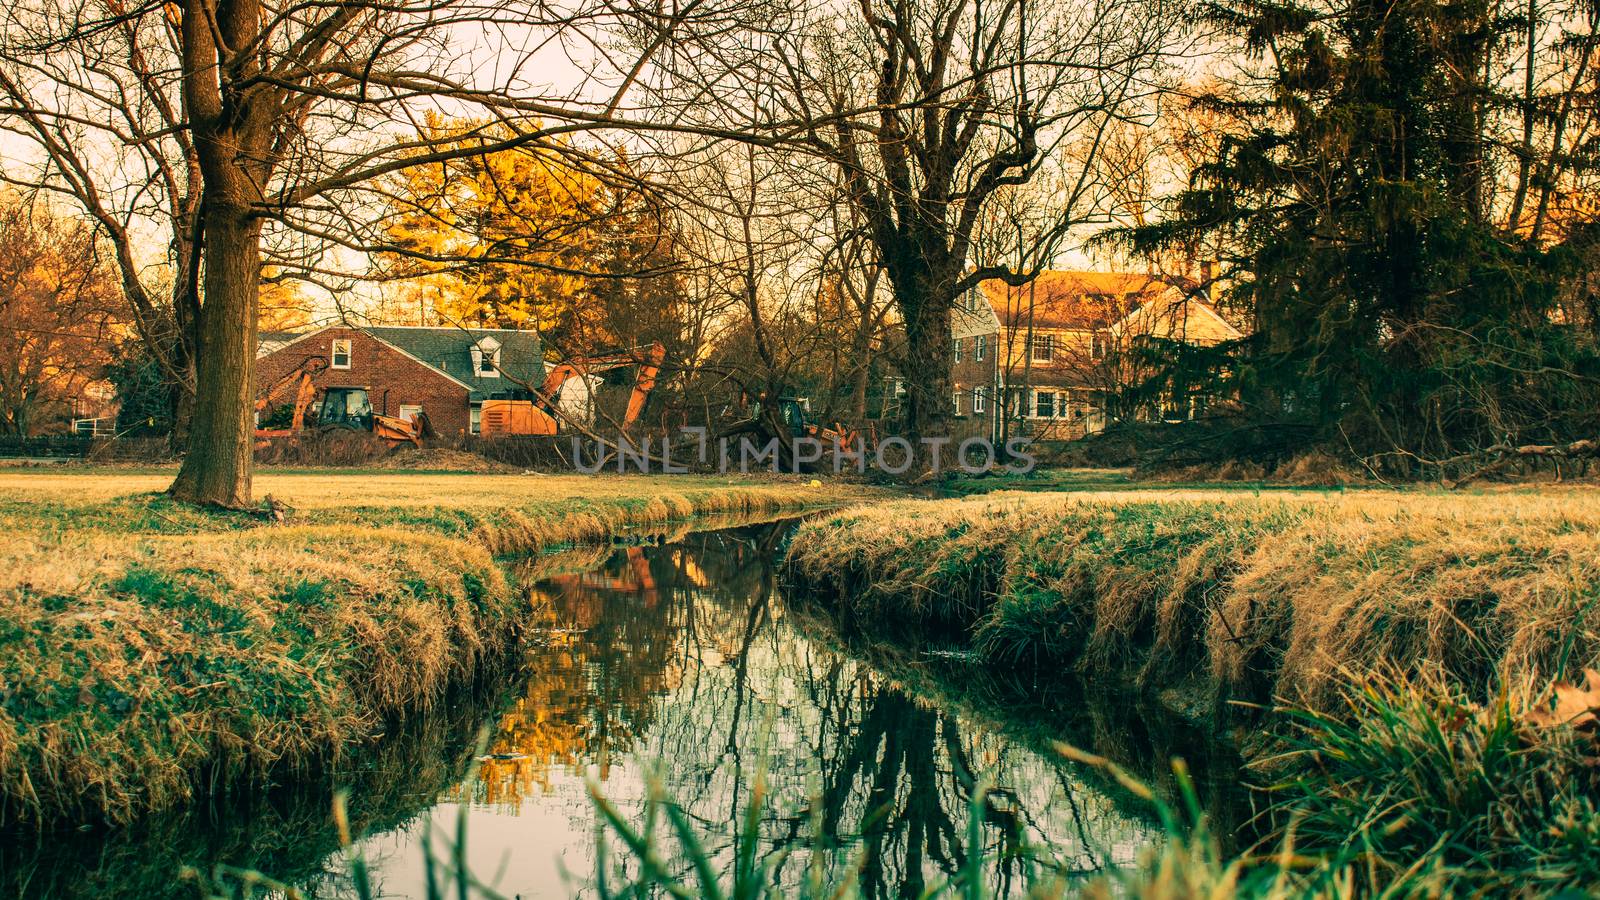 A Small Creek in a Field in a Rural Neighborhood With Houses and by bju12290